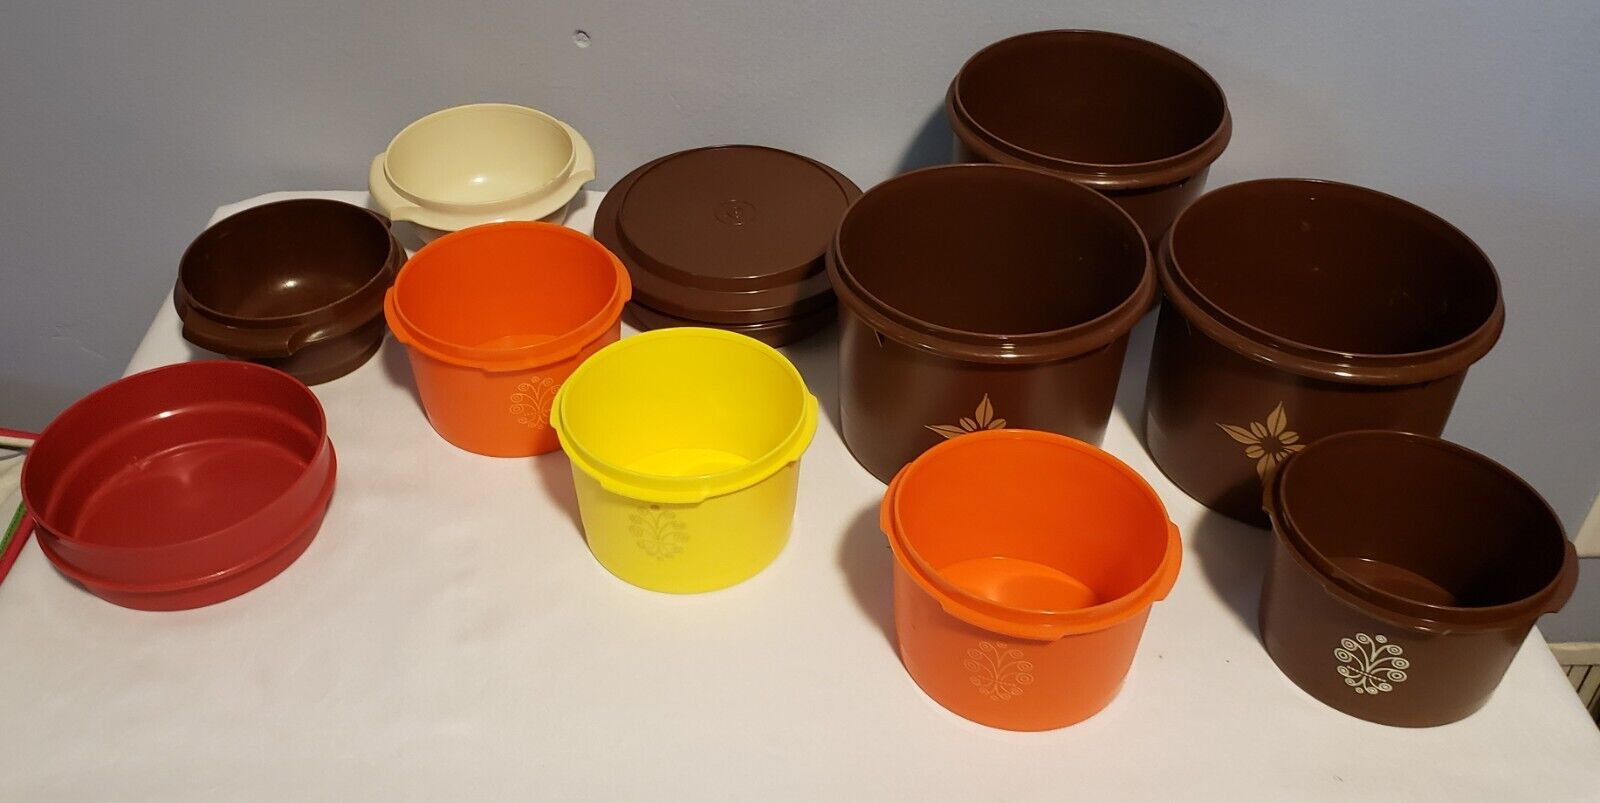 Vintage Tupperware Lot, Brown, Orange, Red and Tan, Lot of 12 Pieces